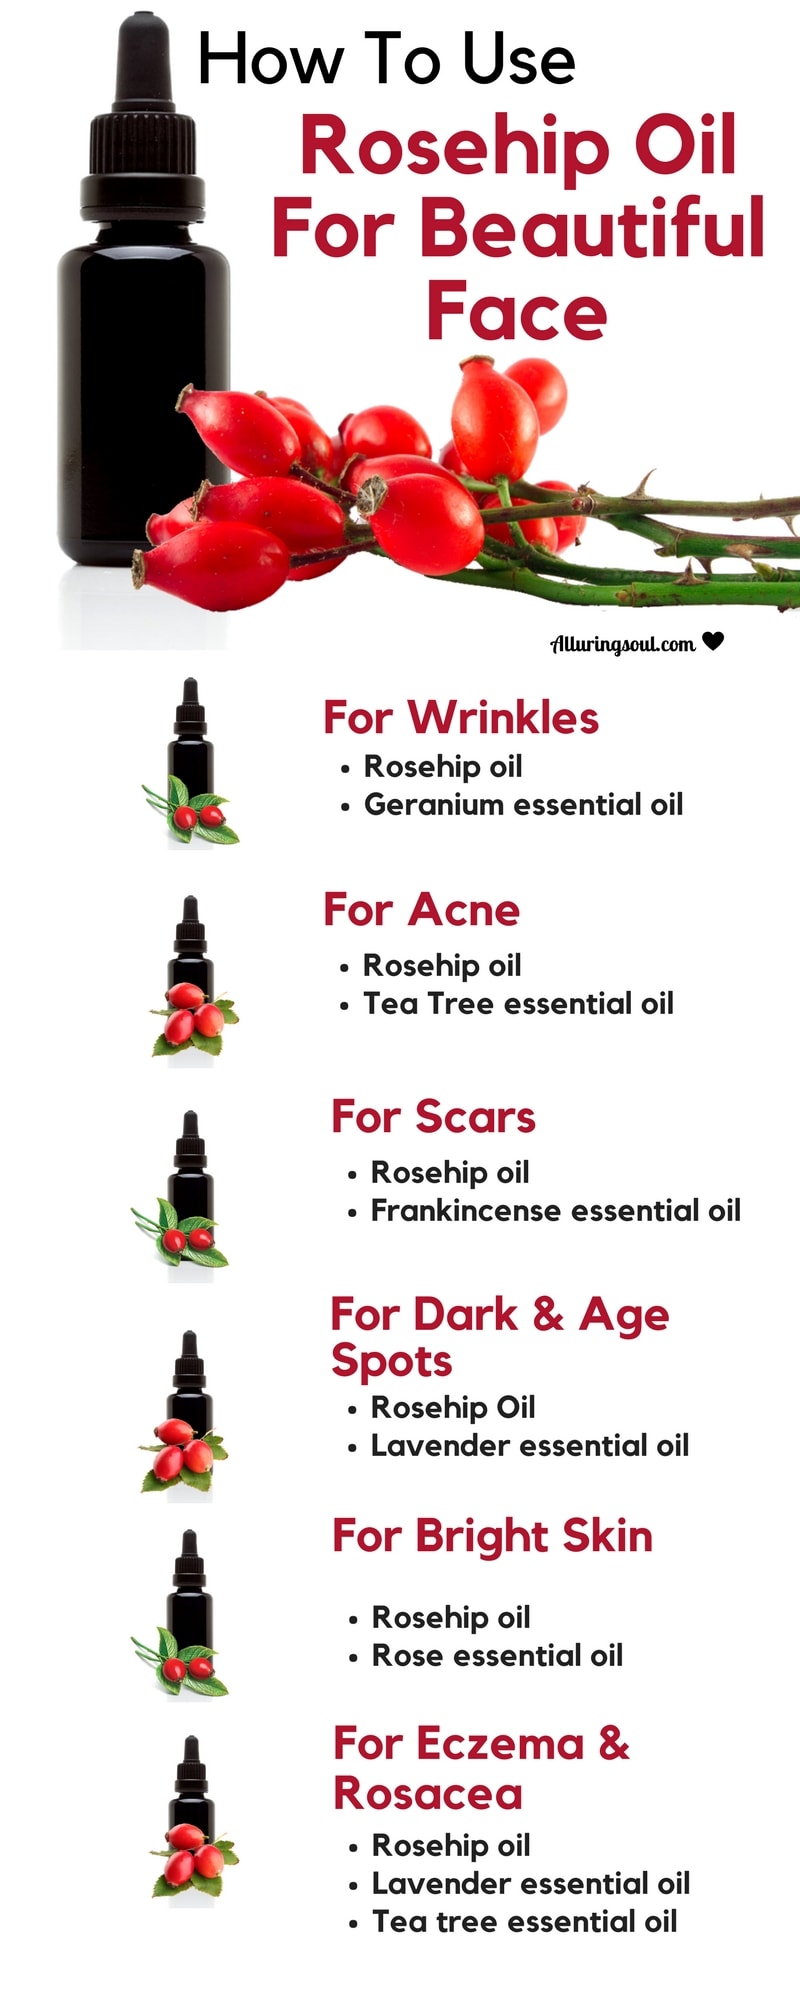 10 Benefits Of Rosehip Oil For Face And How To Use It